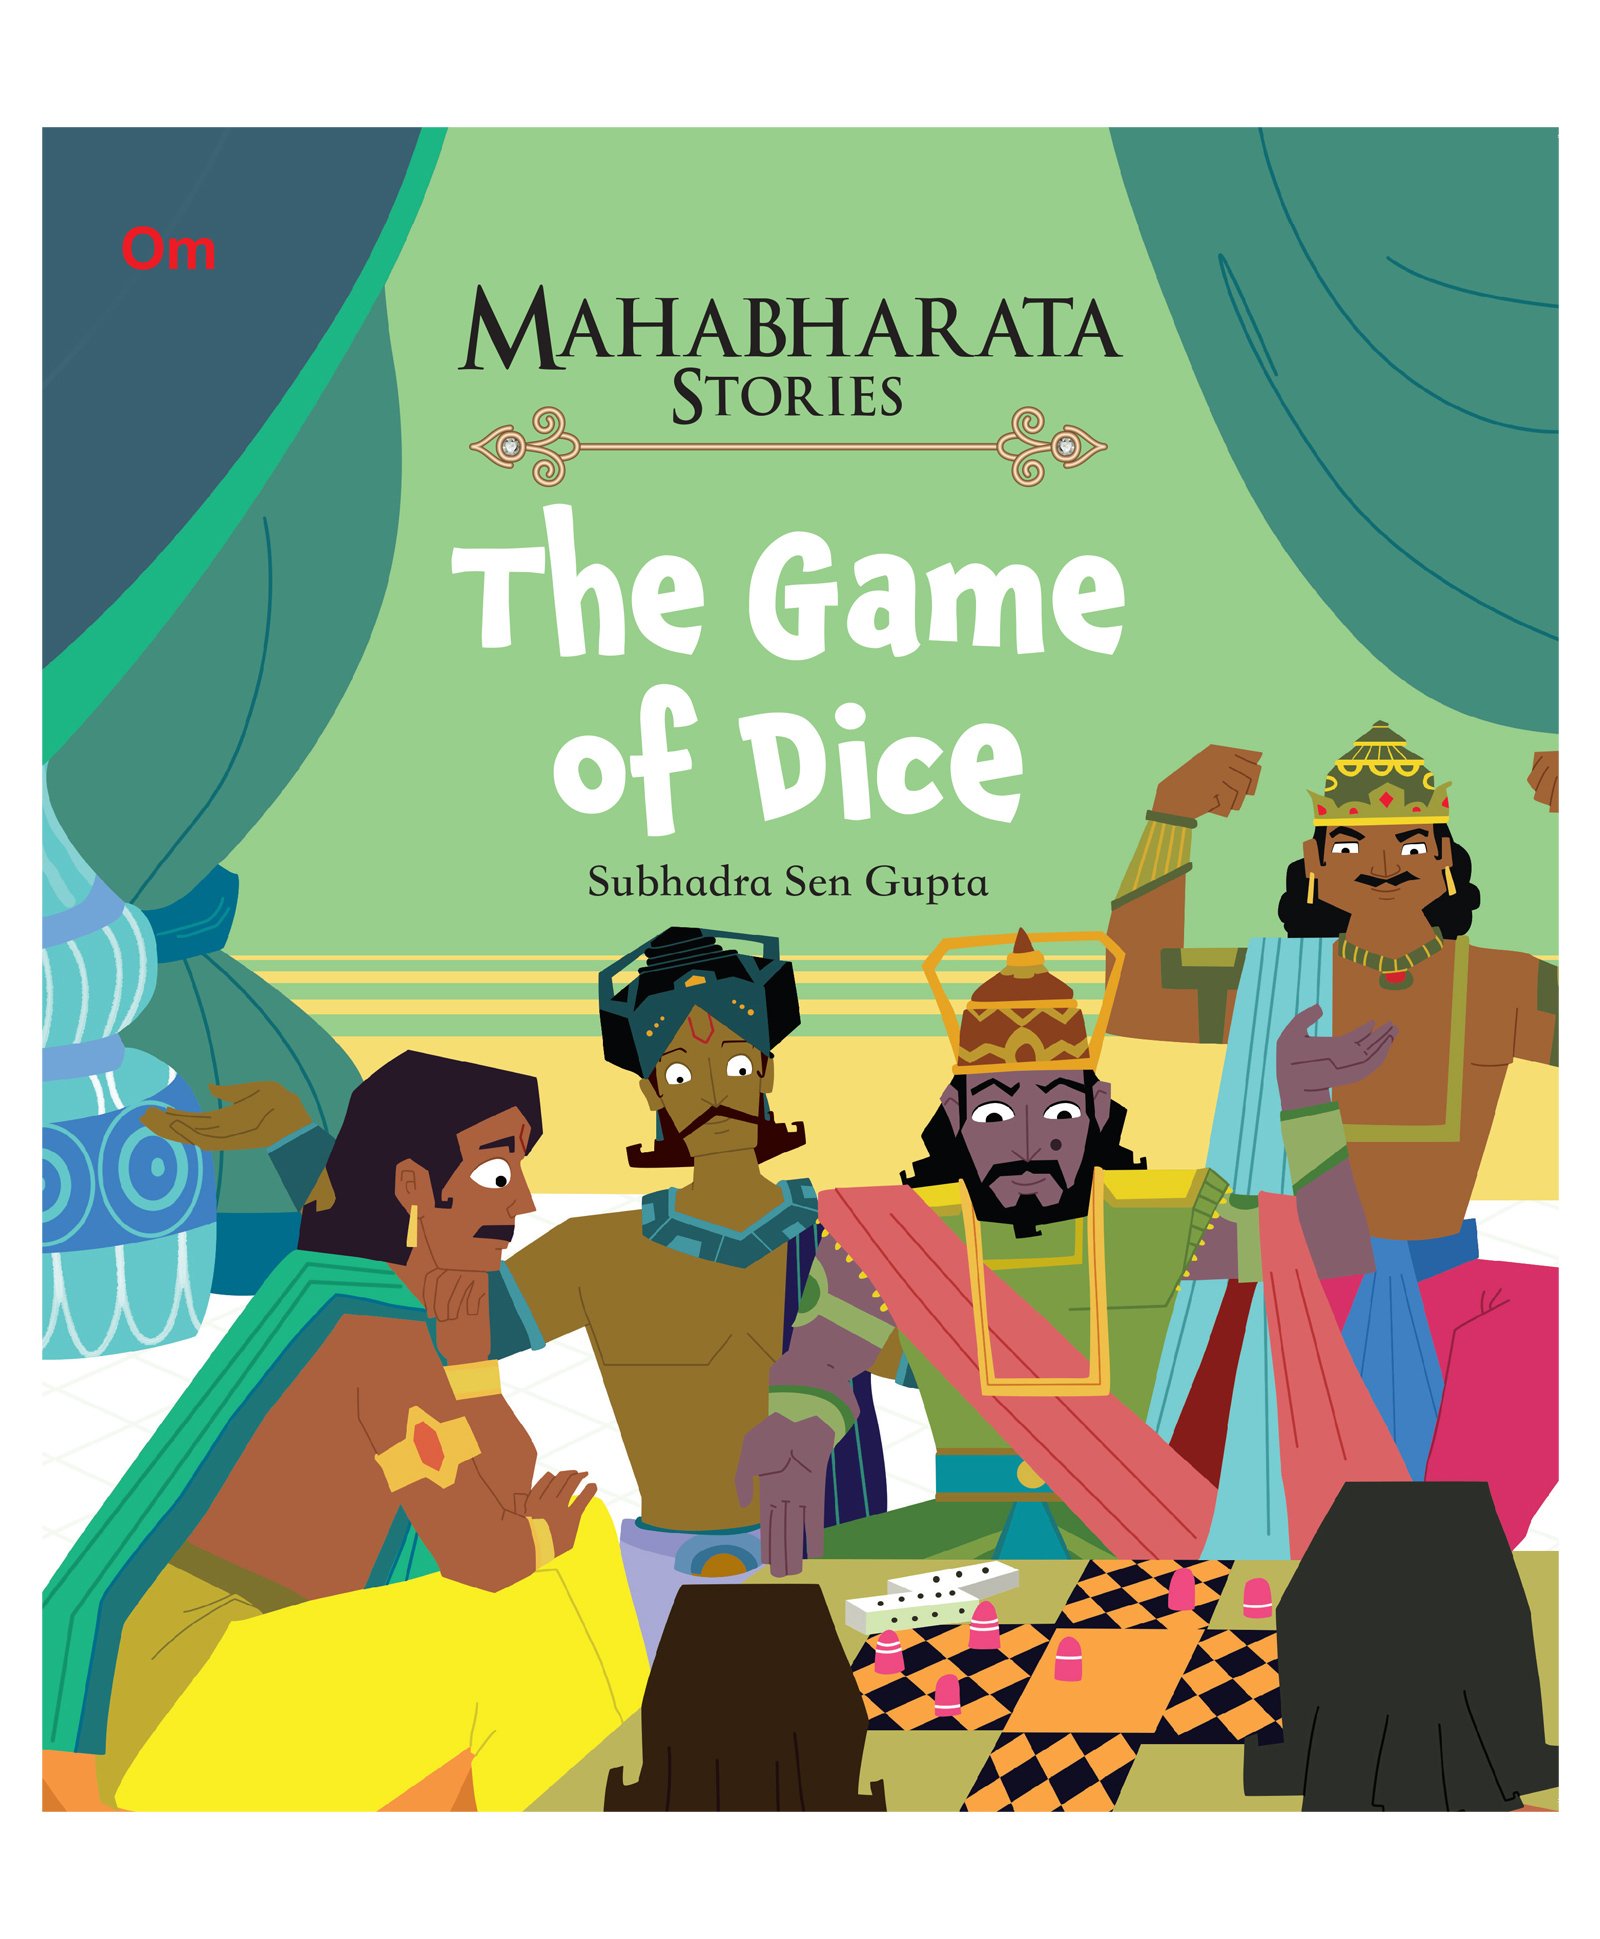 Mahabharata Stories: The Game of Dice Story Book - English Online in India,  Buy at Best Price from  - 8801394